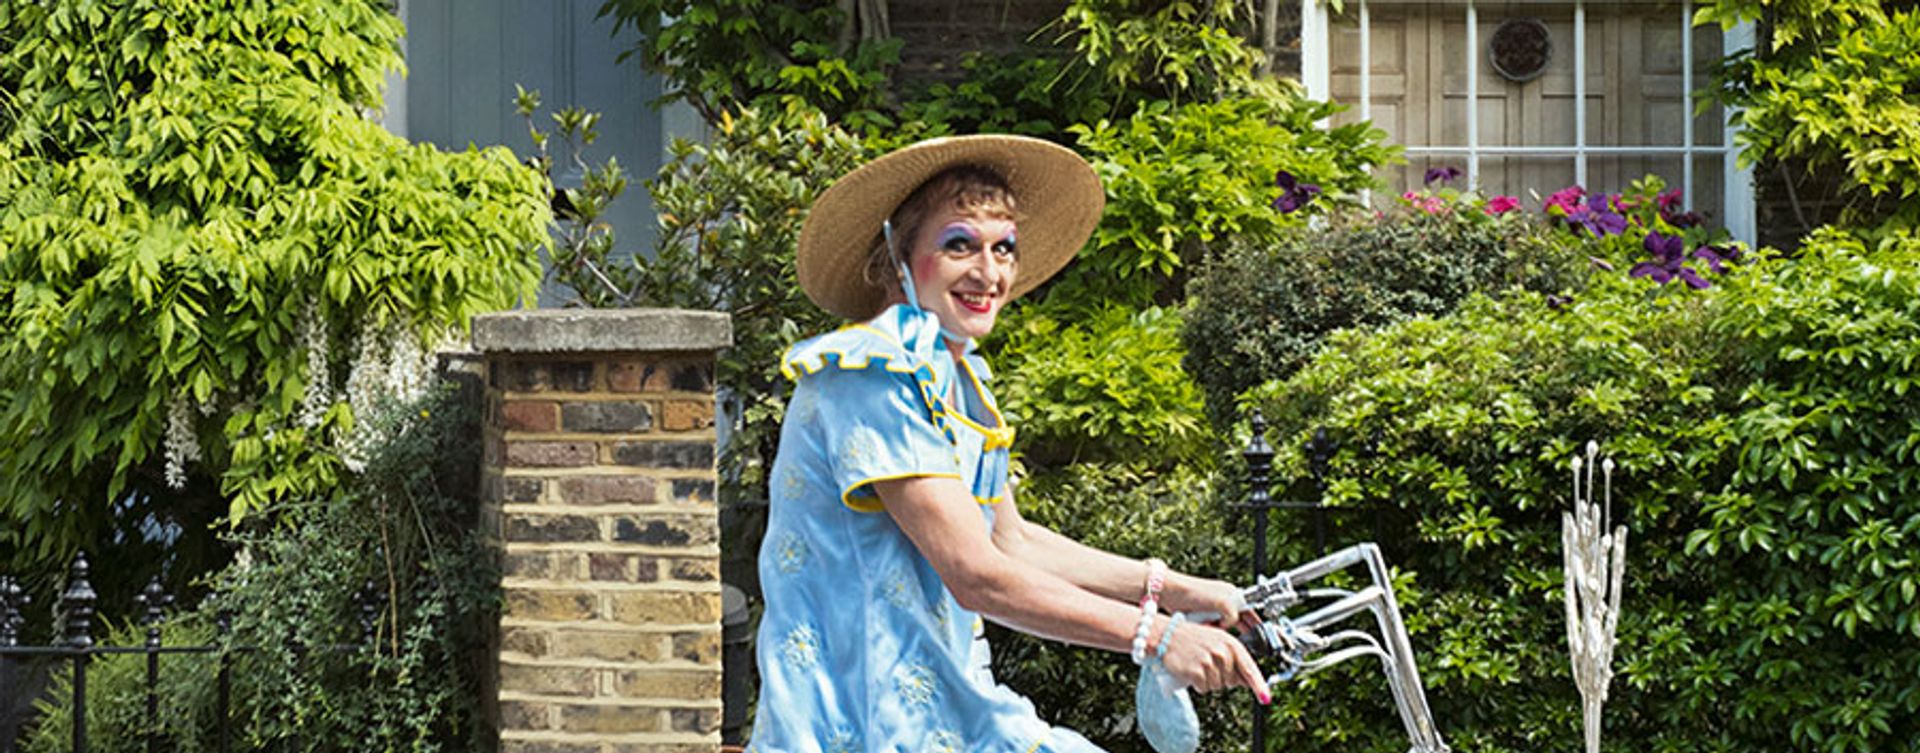 Grayson Perry posing with Princess Freedom Bicycle (2017) (© 2020 the artist; Photo: Thierry Bal) Grayson Perry posing with Princess Freedom Bicycle (2017) (© 2020 the artist; Photo: Thierry Bal)